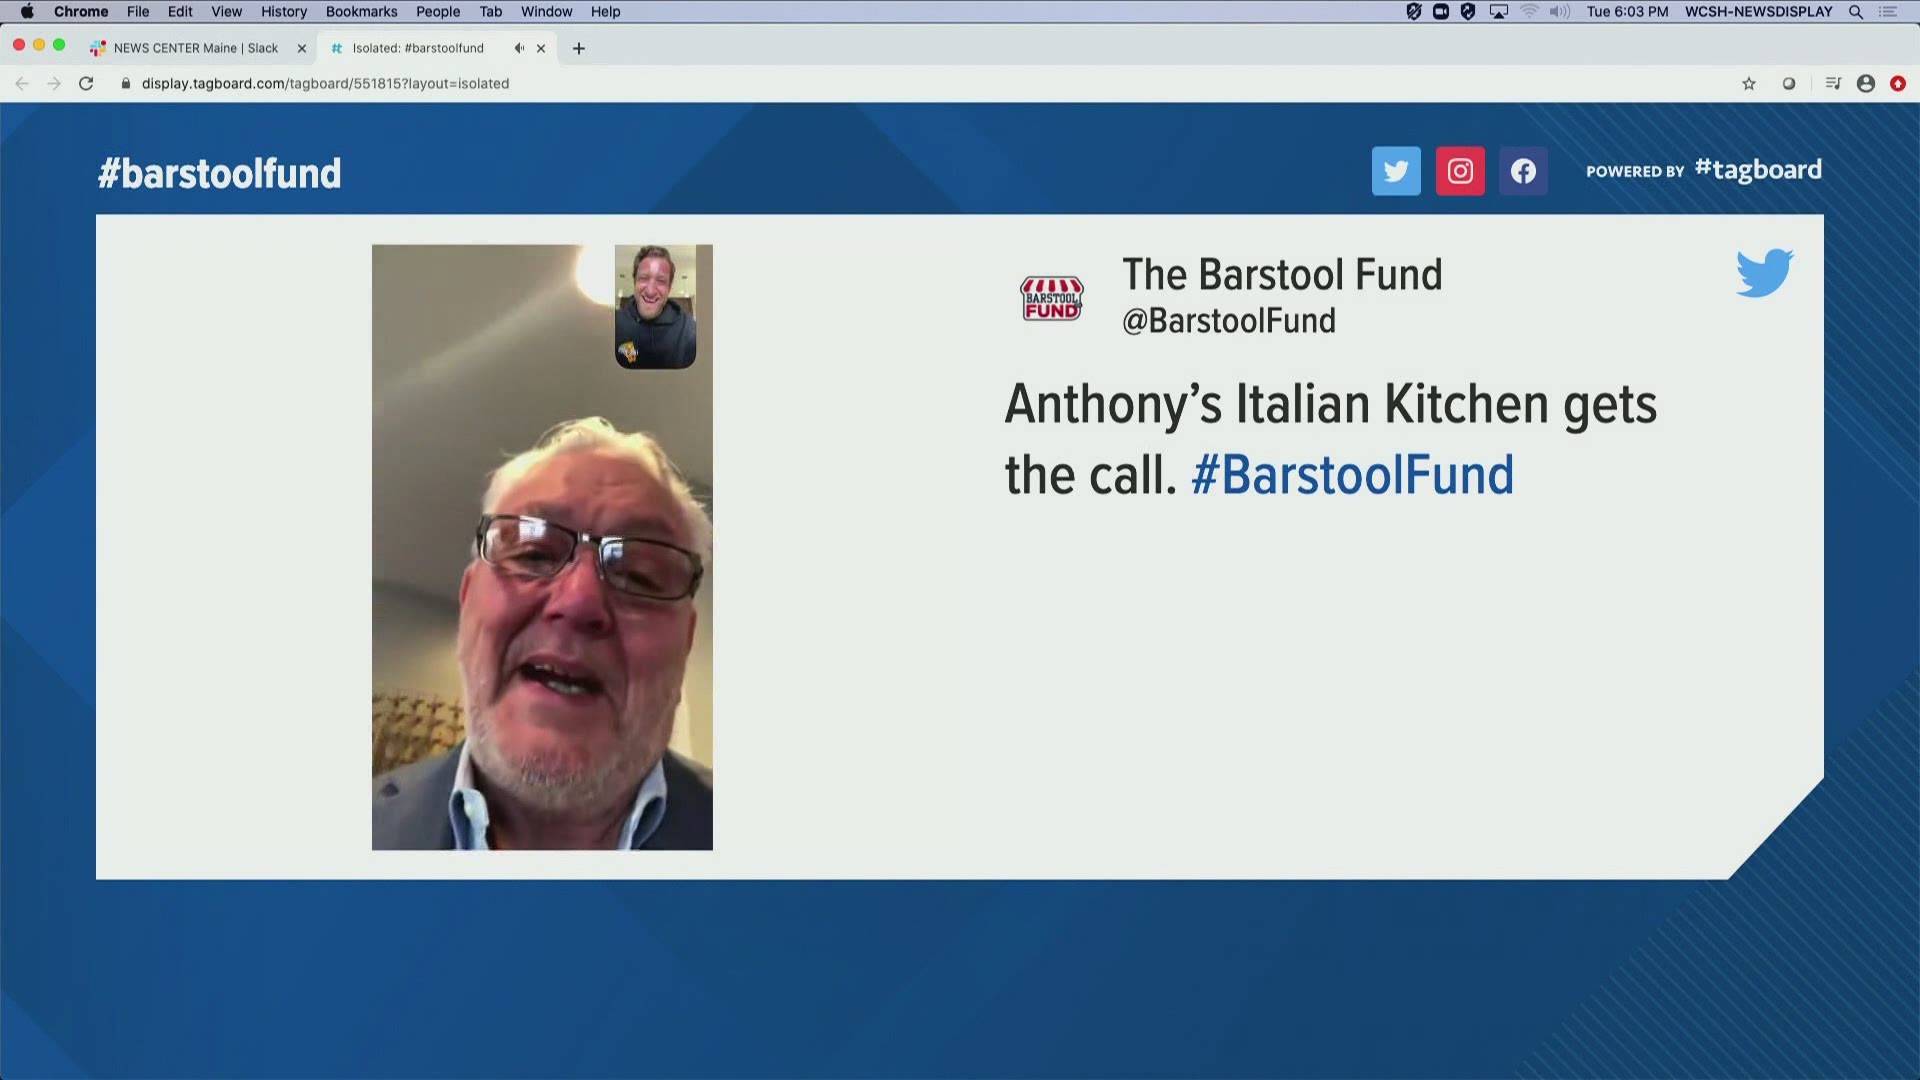 Anthony's Italian Kitchen is a recipient of The Barstool Fund